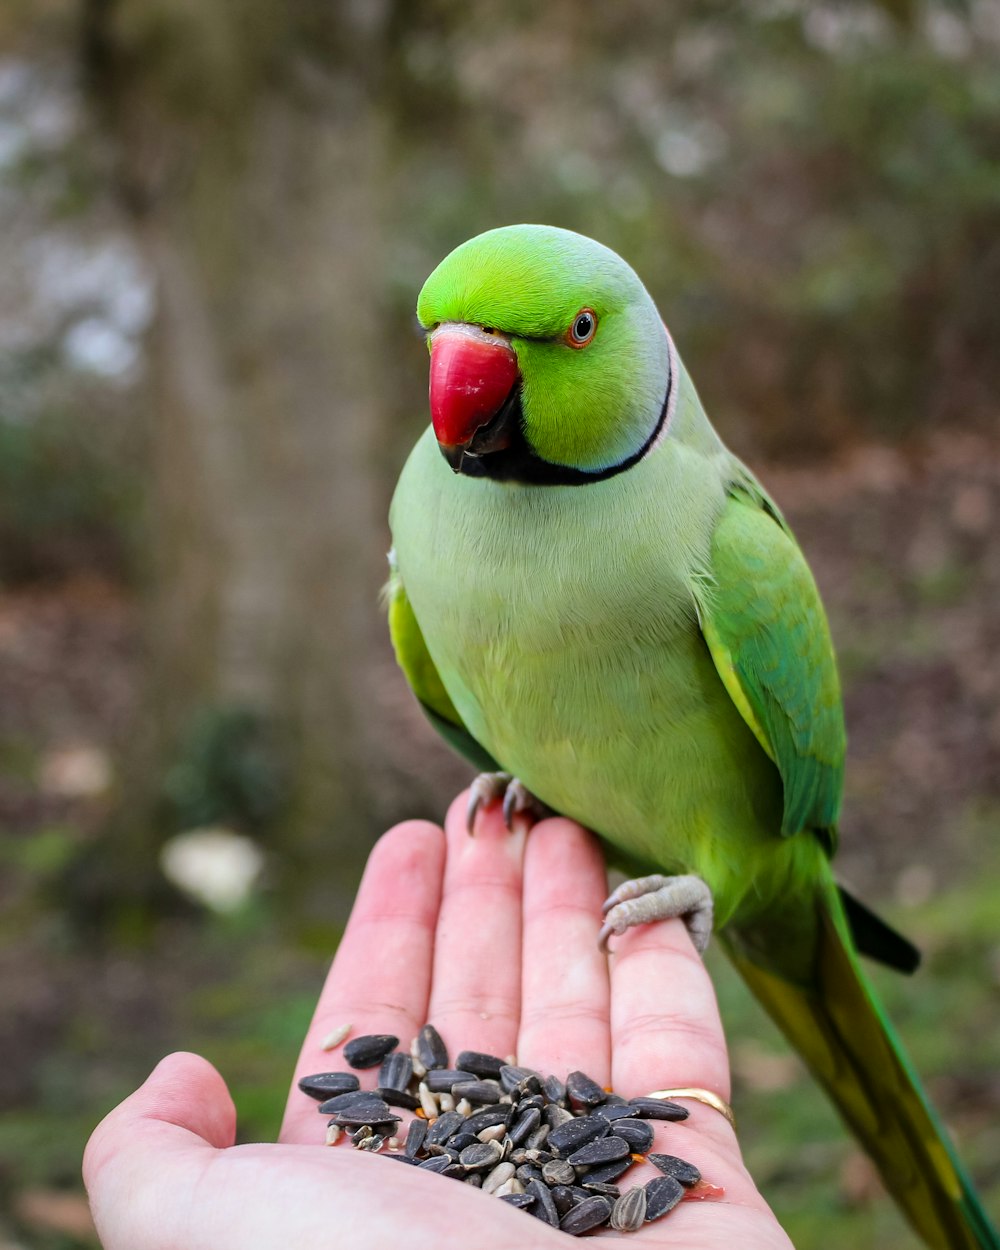 green bird on persons hand